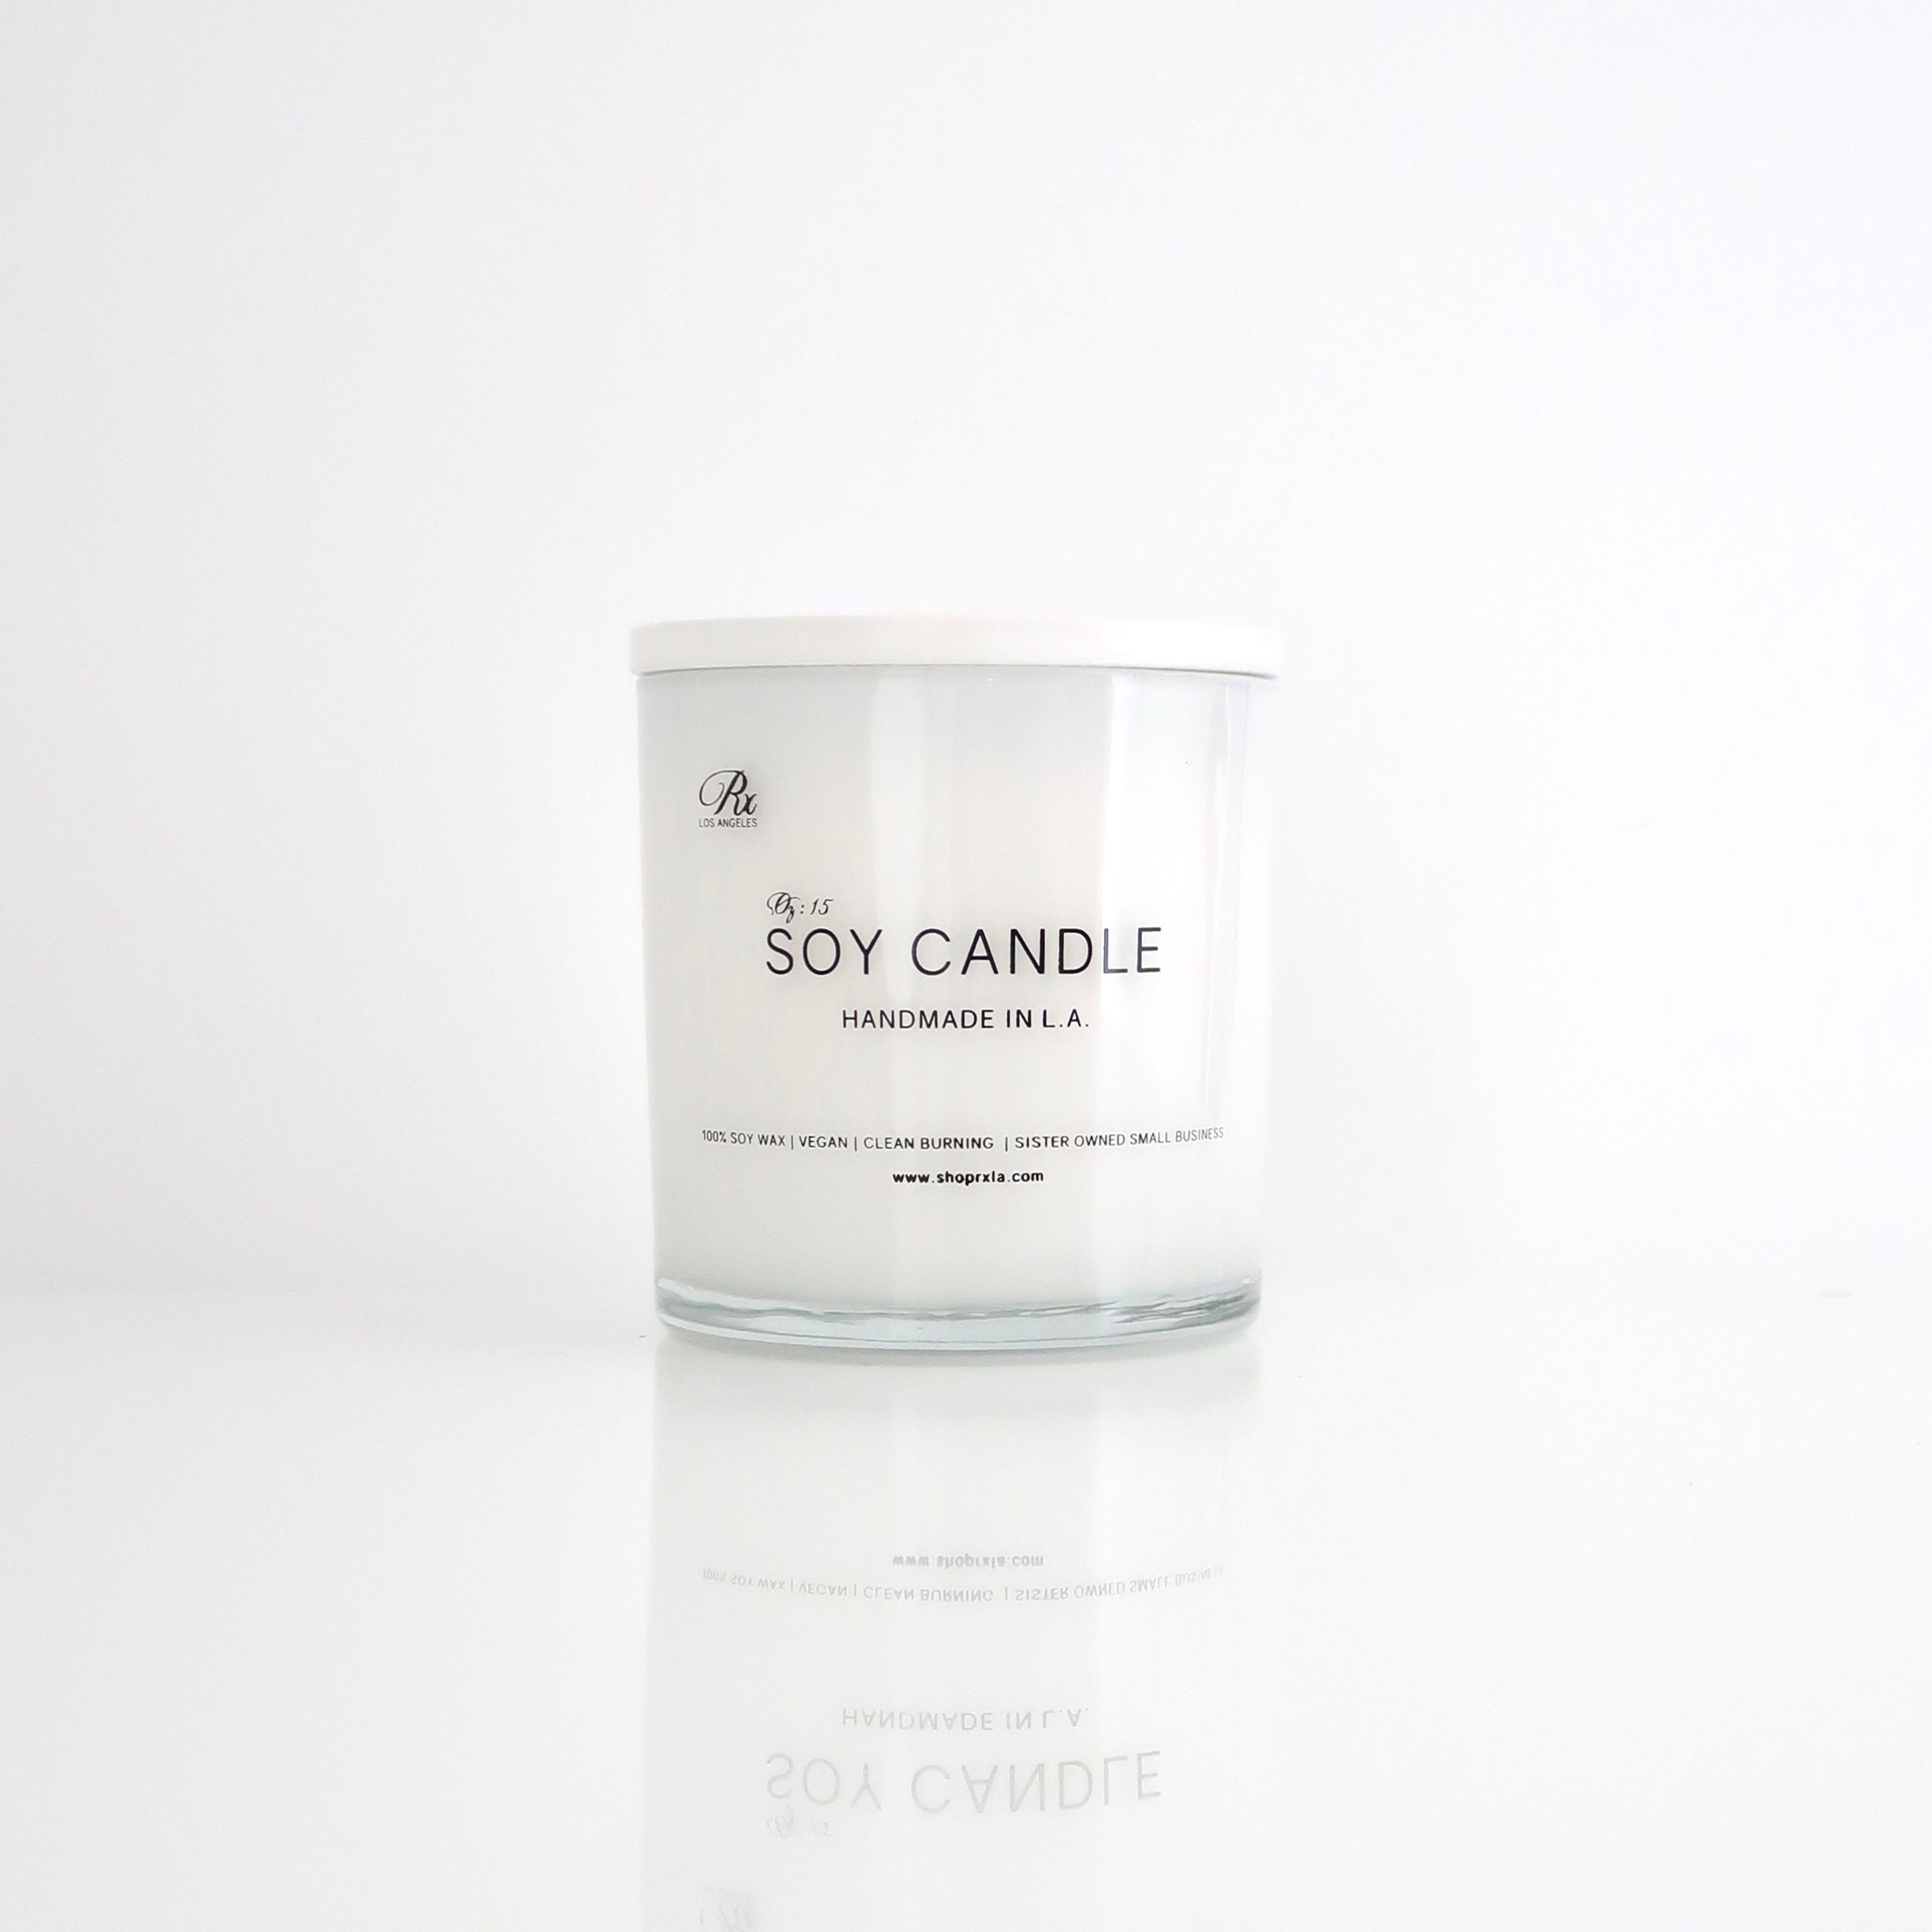 Lake Tahoe Soy Candle- Limited Edition